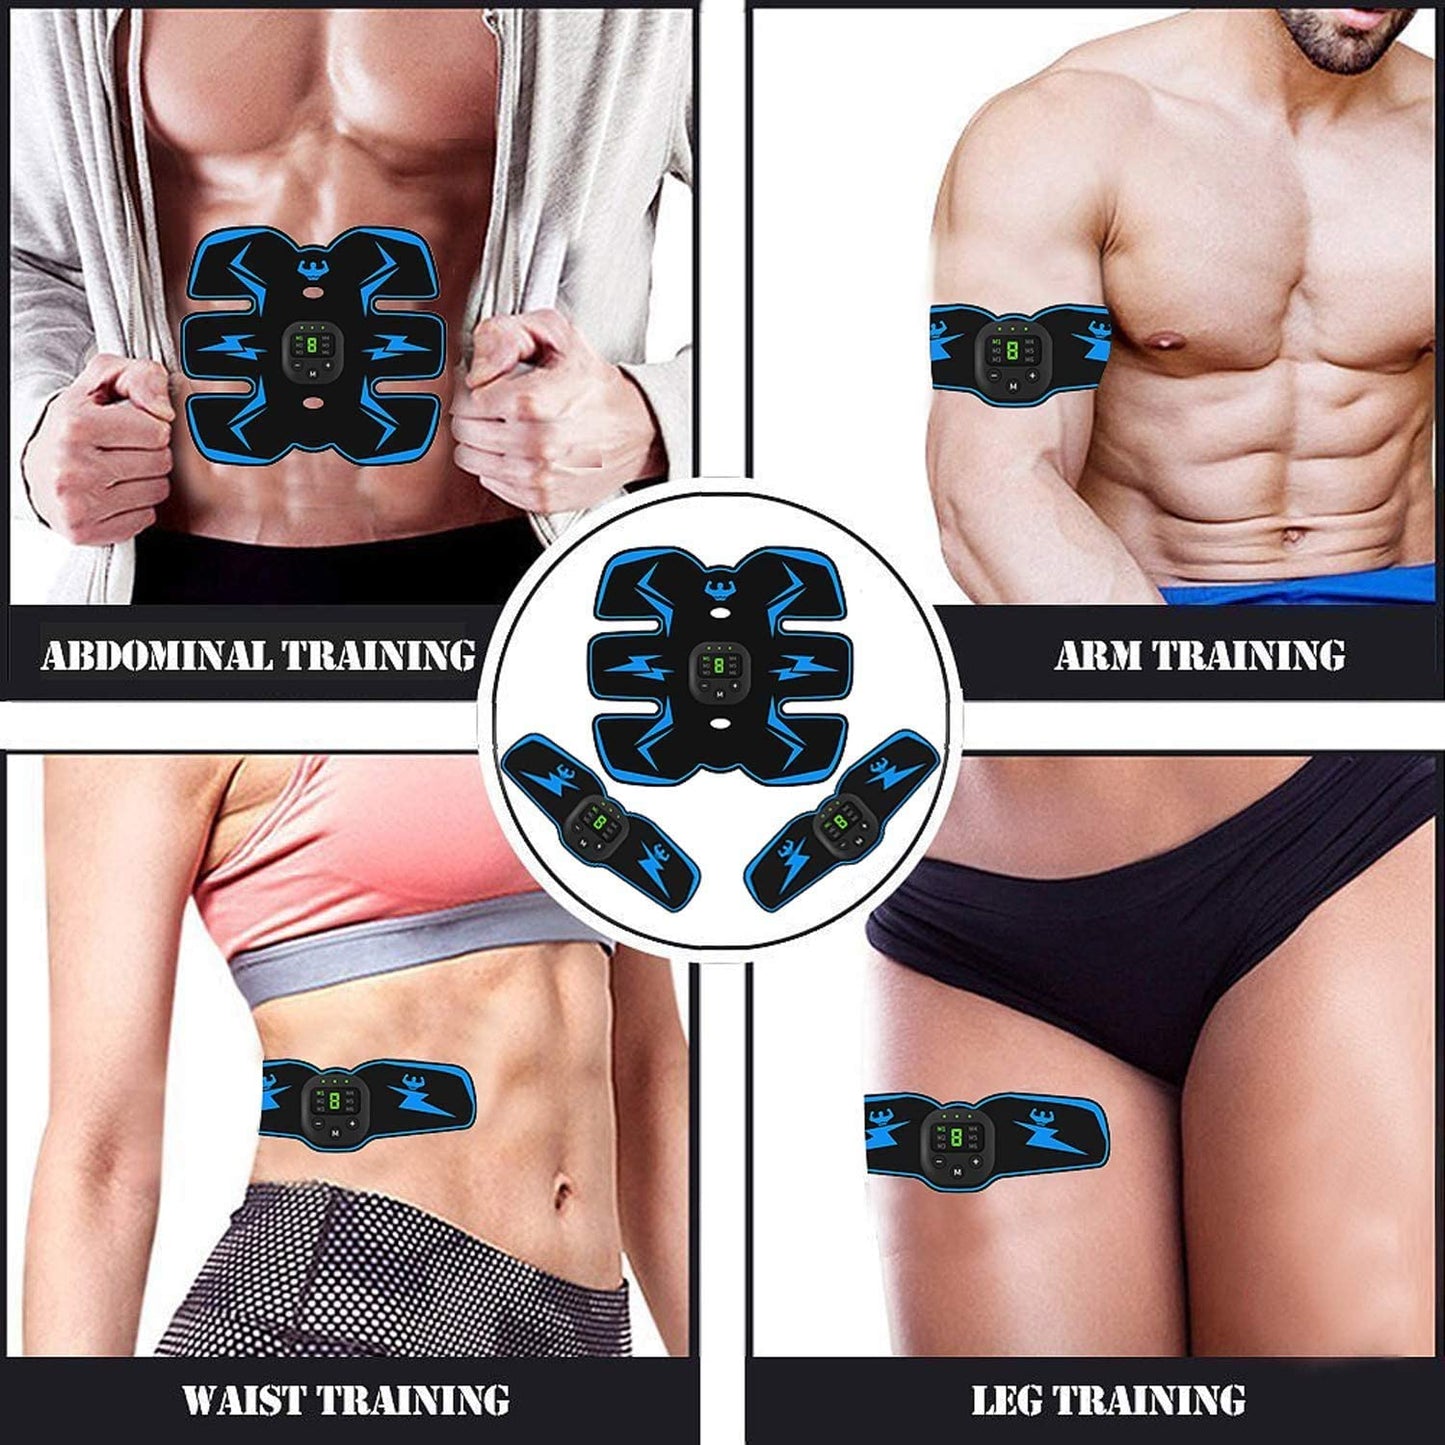 Tactical-X ABS Stimulator - Enhance Your Workout and Sculpt Your Abs!